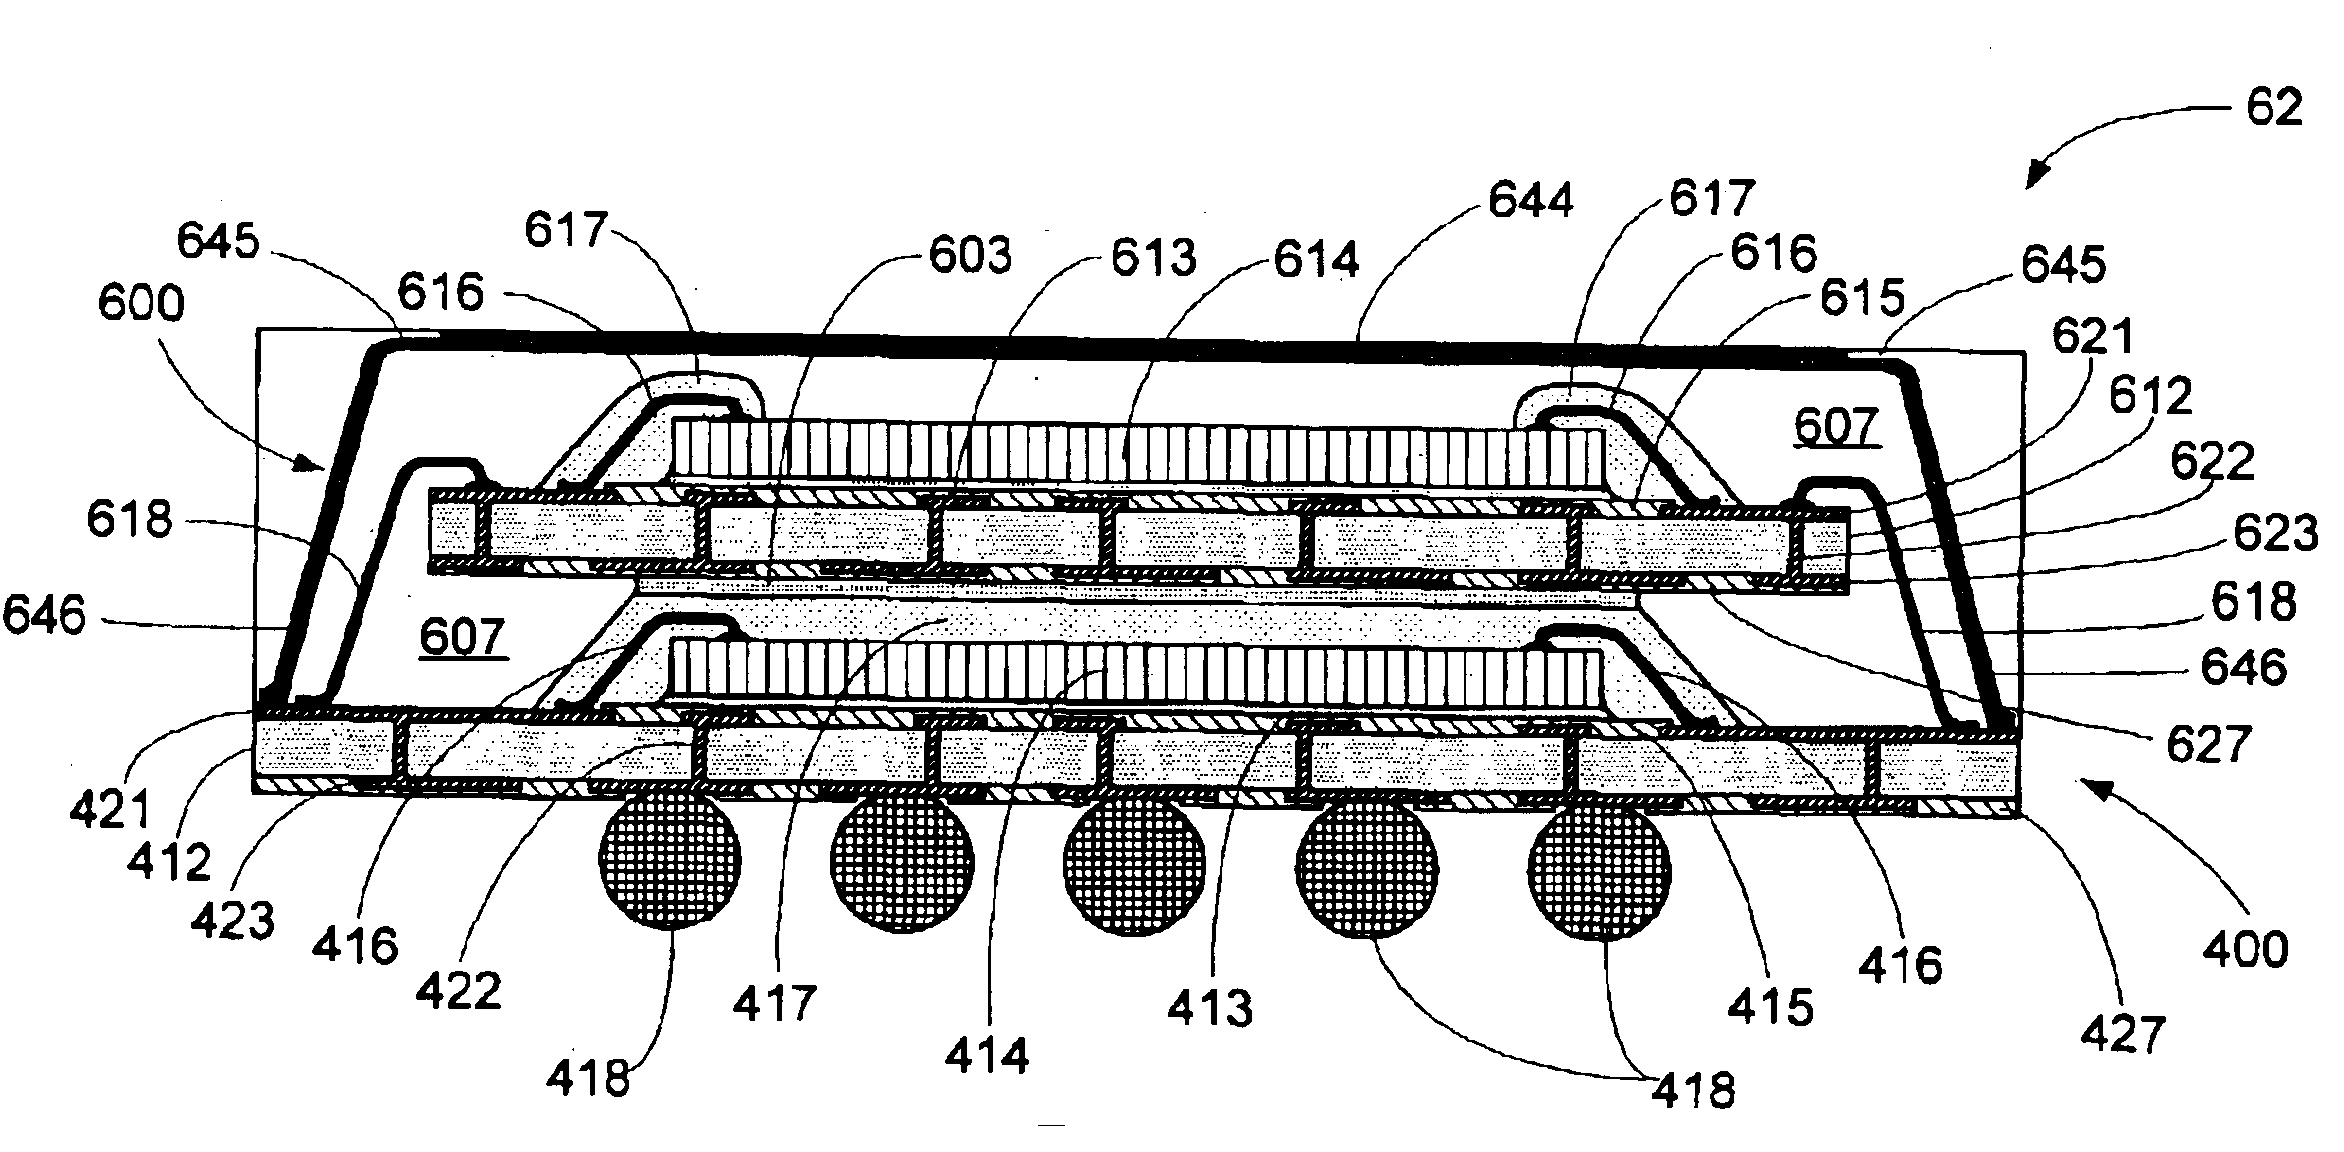 Semiconductor multi-package module having wire bond interconnect between stacked packages and having electrical shield